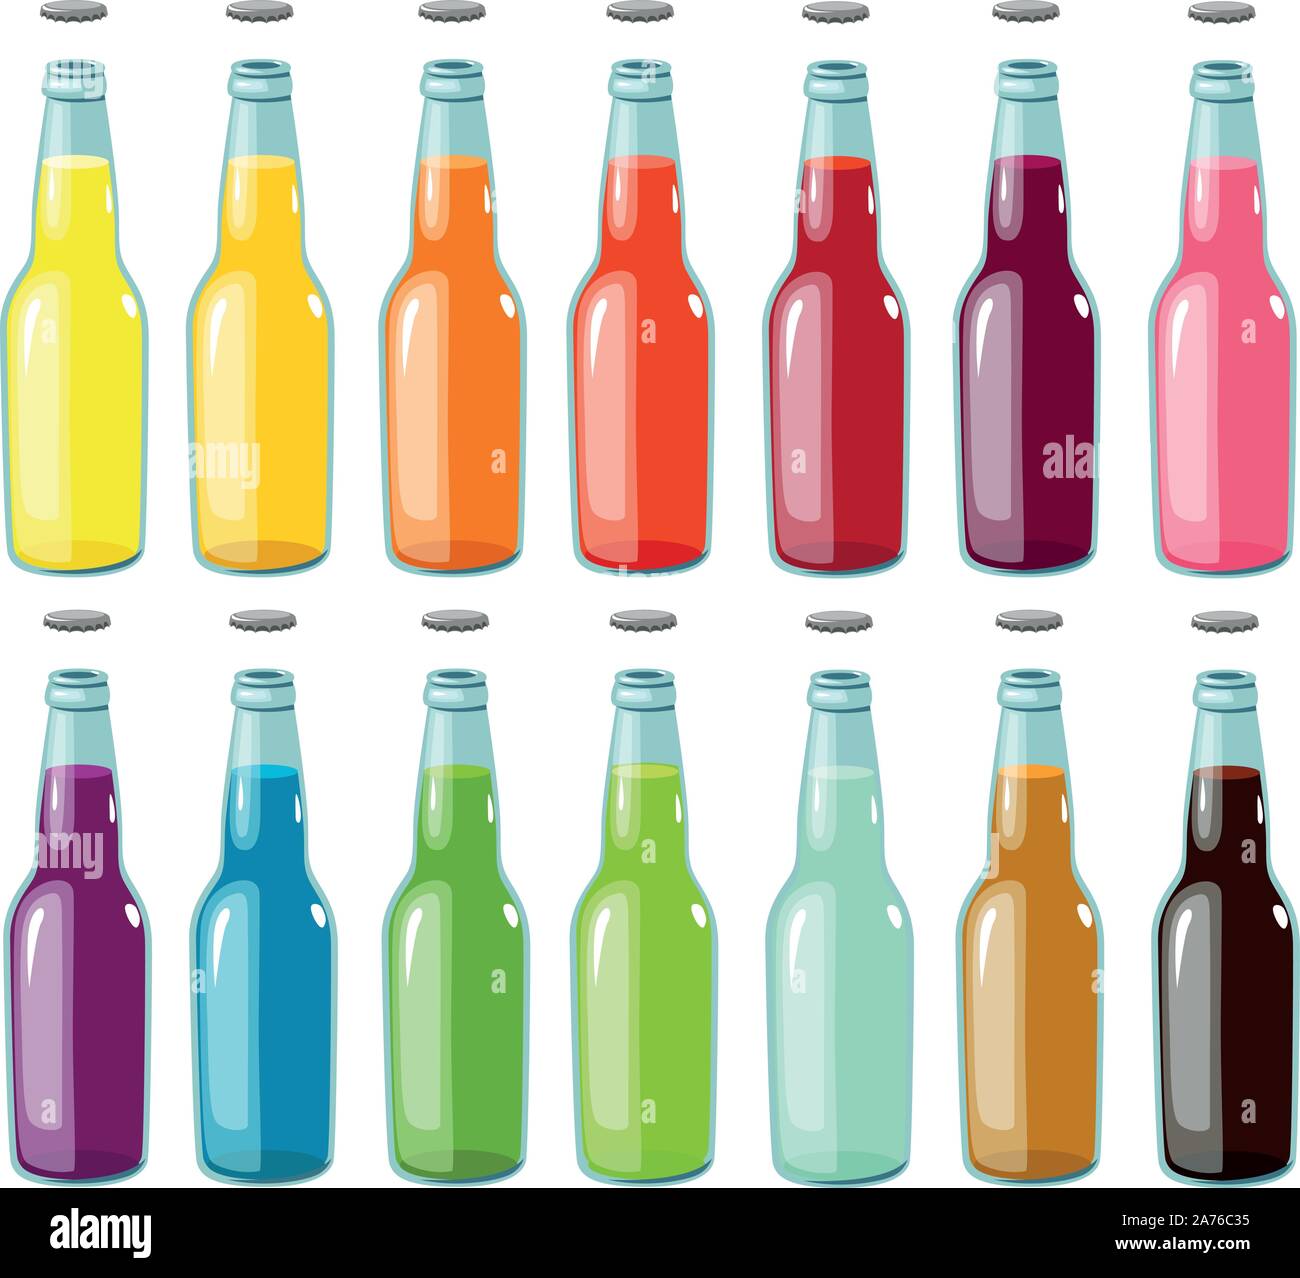 Vector illustration of various soda glass bottles with different colors and flavors Stock Vector